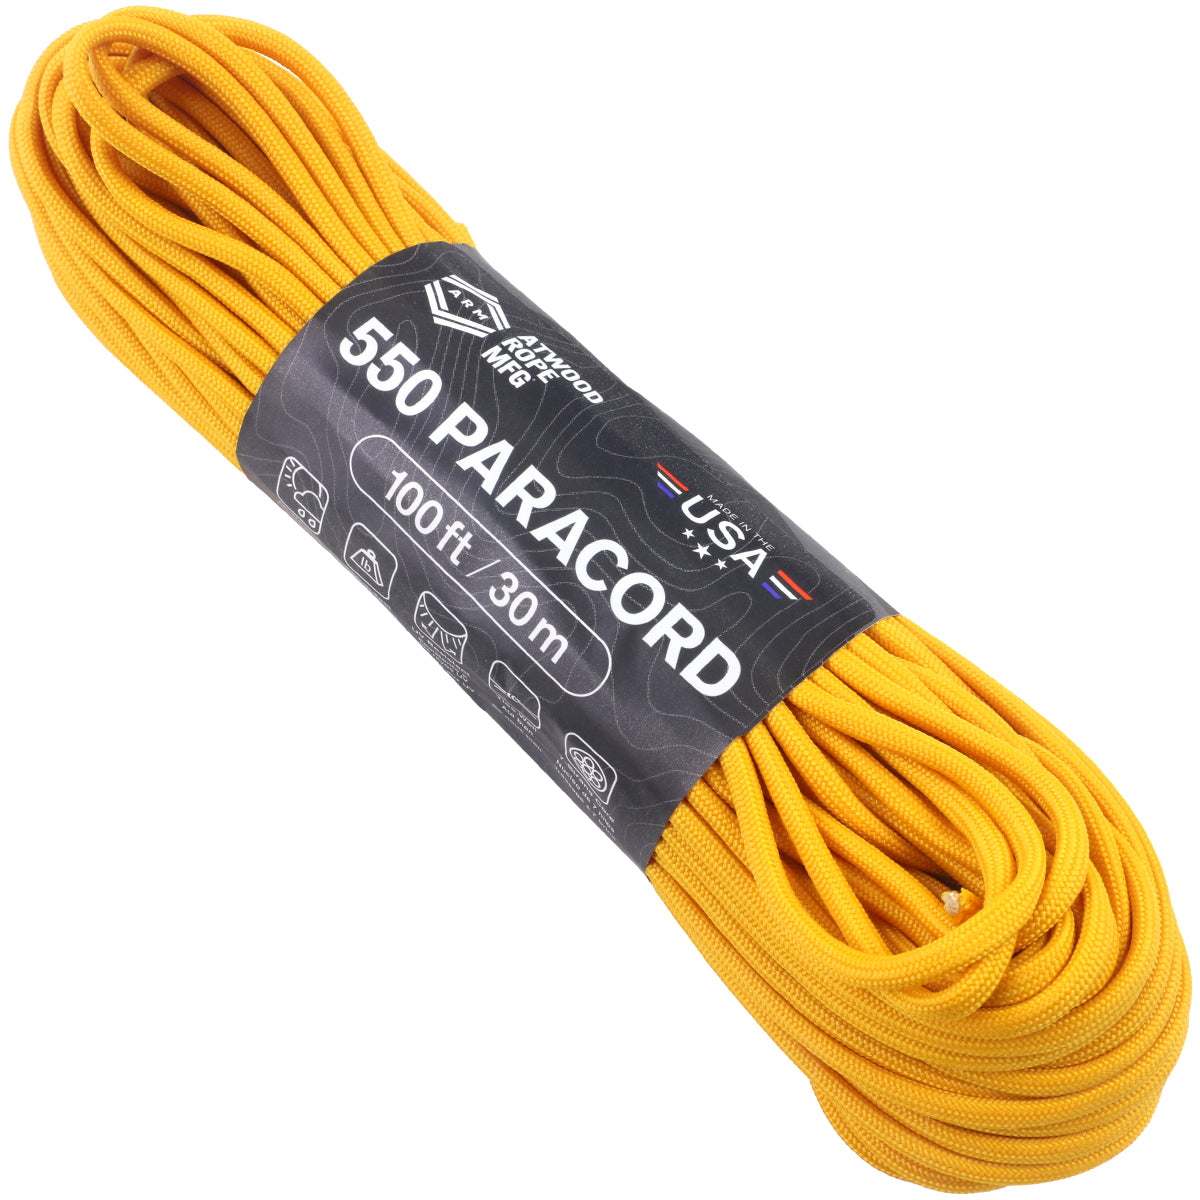 550 Paracord - Five Colors 100 Feet Total by The Kosovo